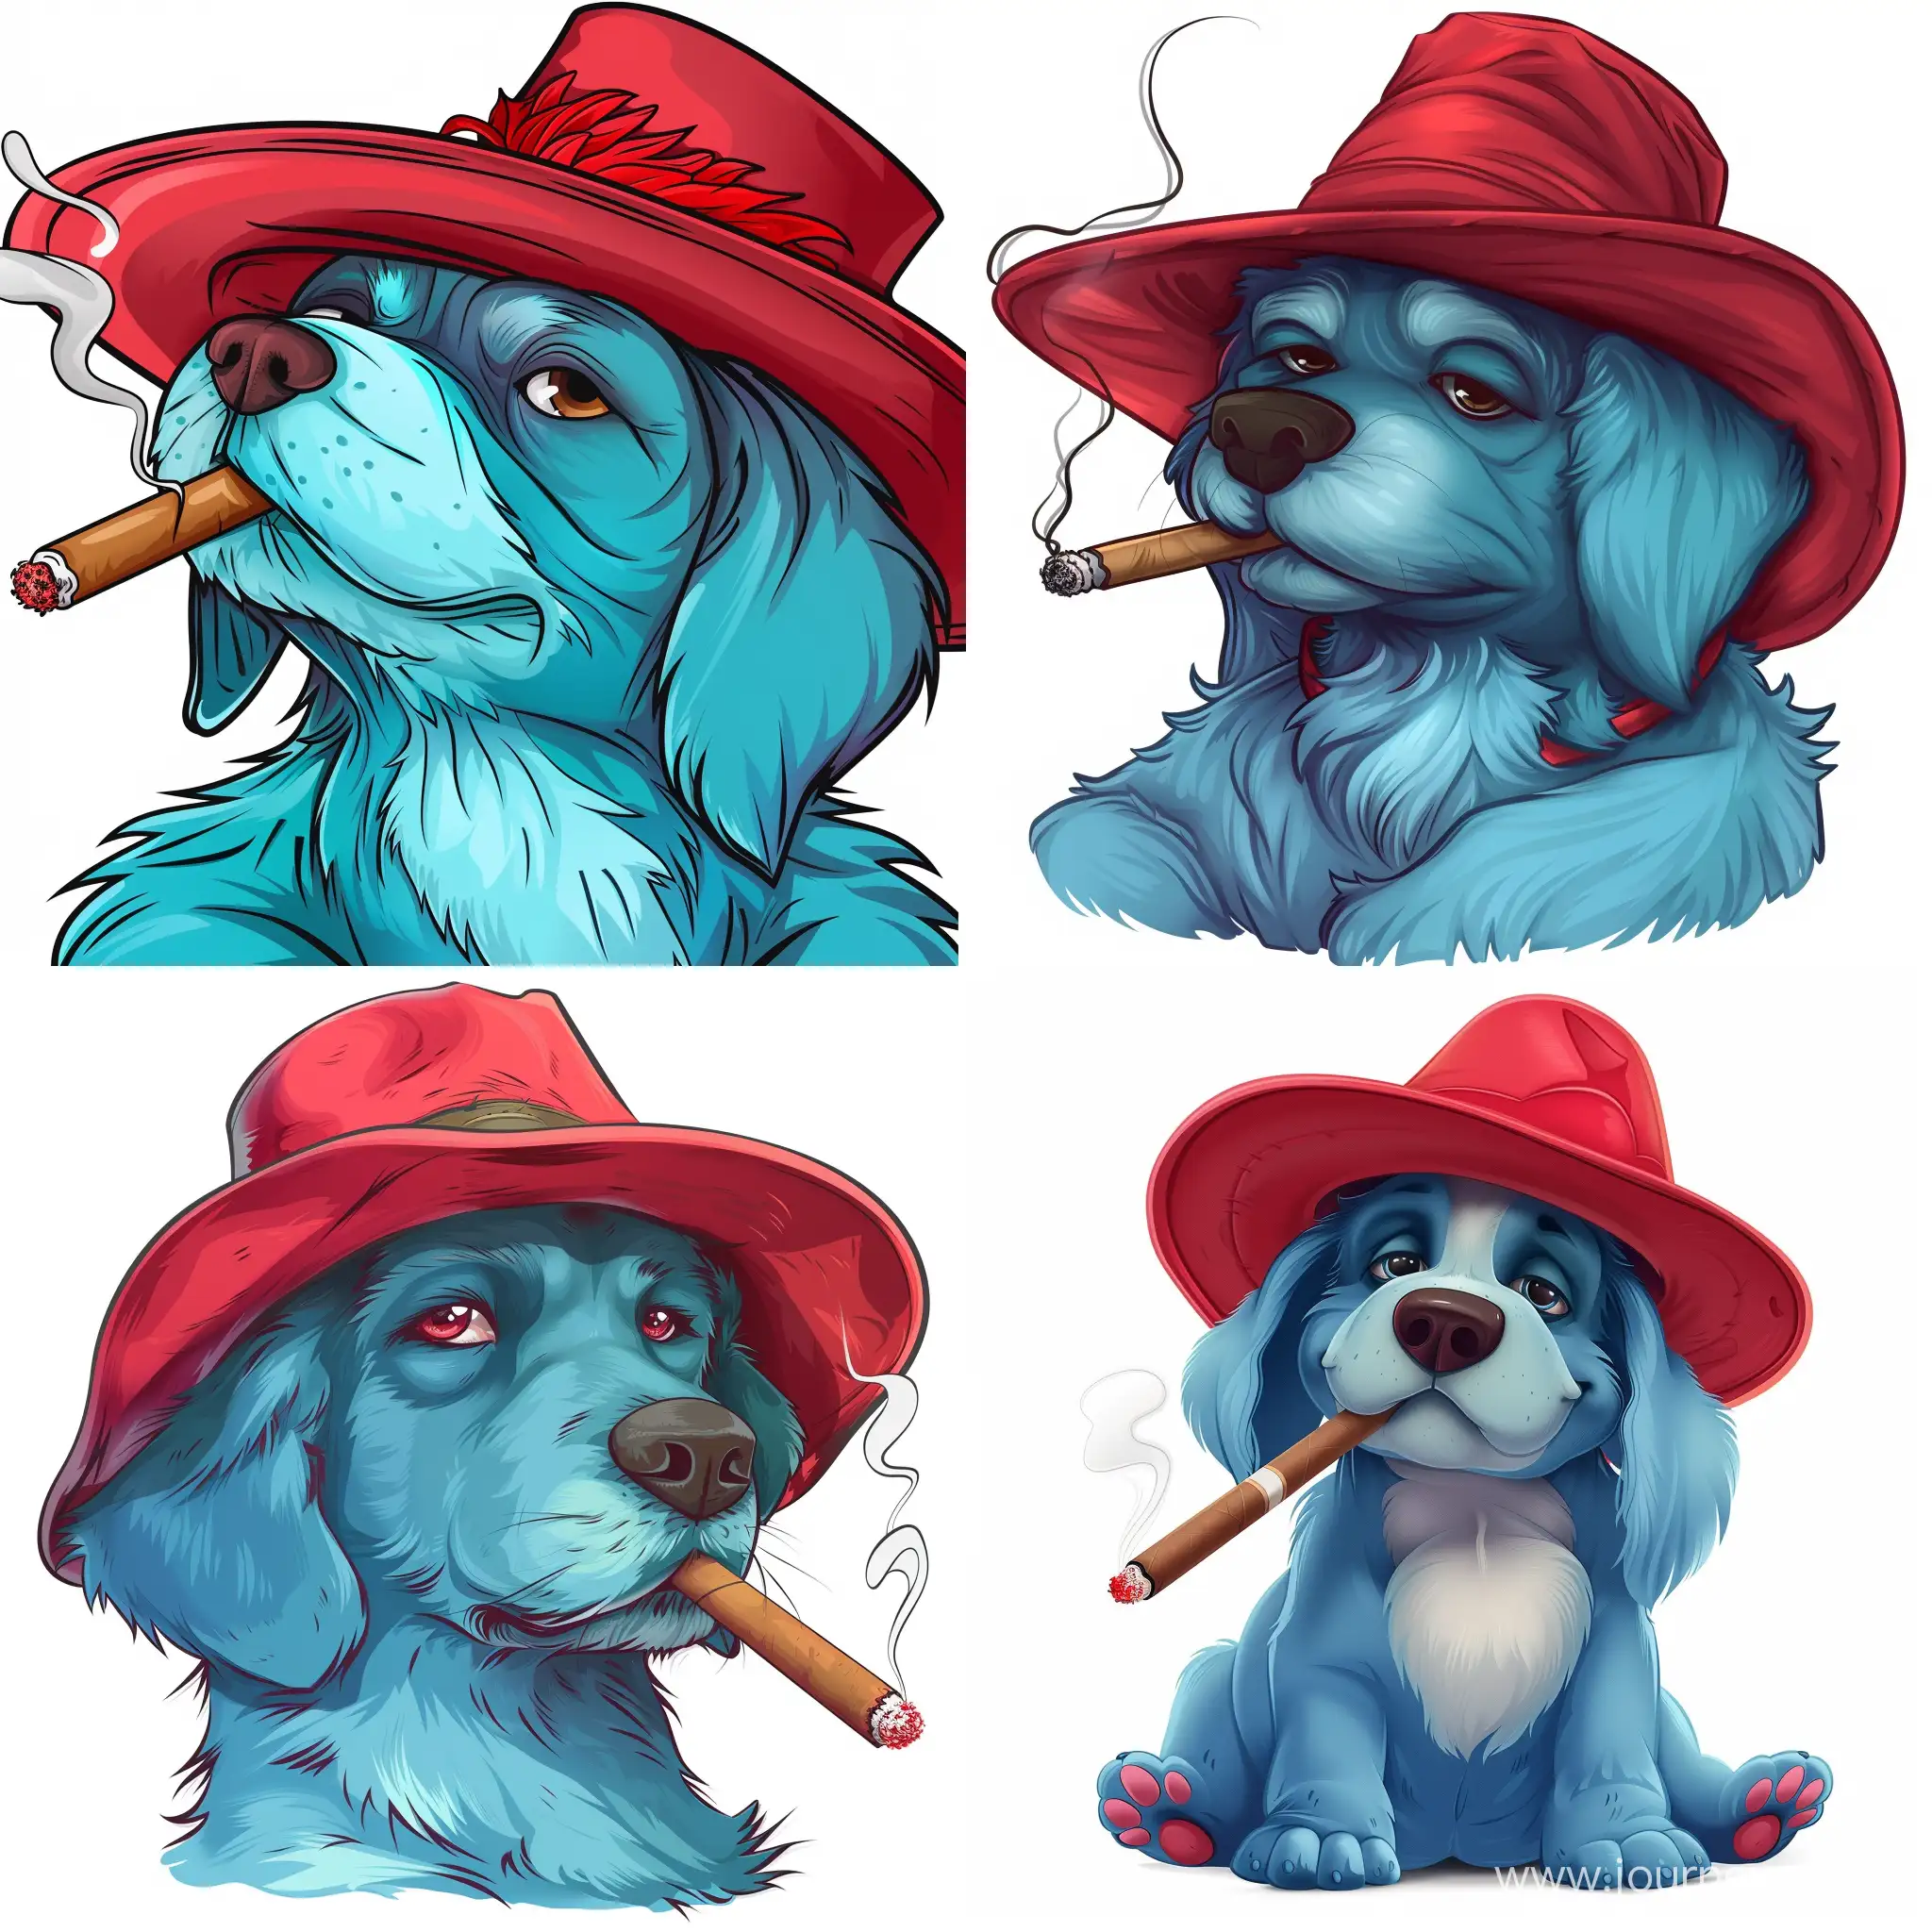 Animated-Blue-Dog-Smoking-Cigar-in-Red-Hat-on-White-Background